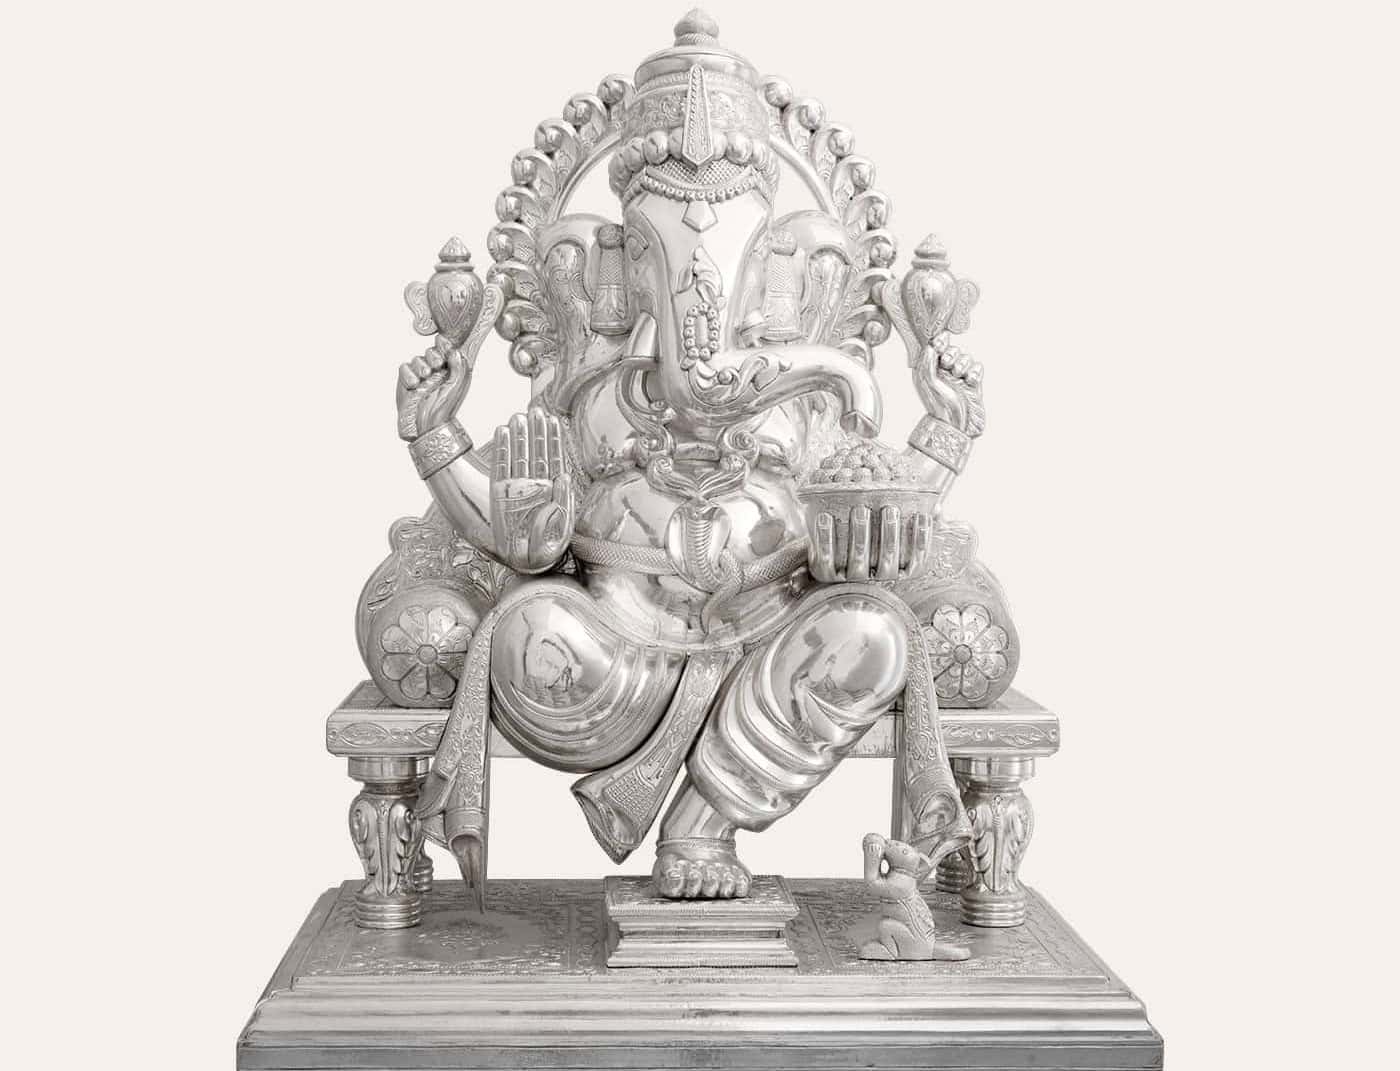 Divine power of silver in world myths highlighted in art